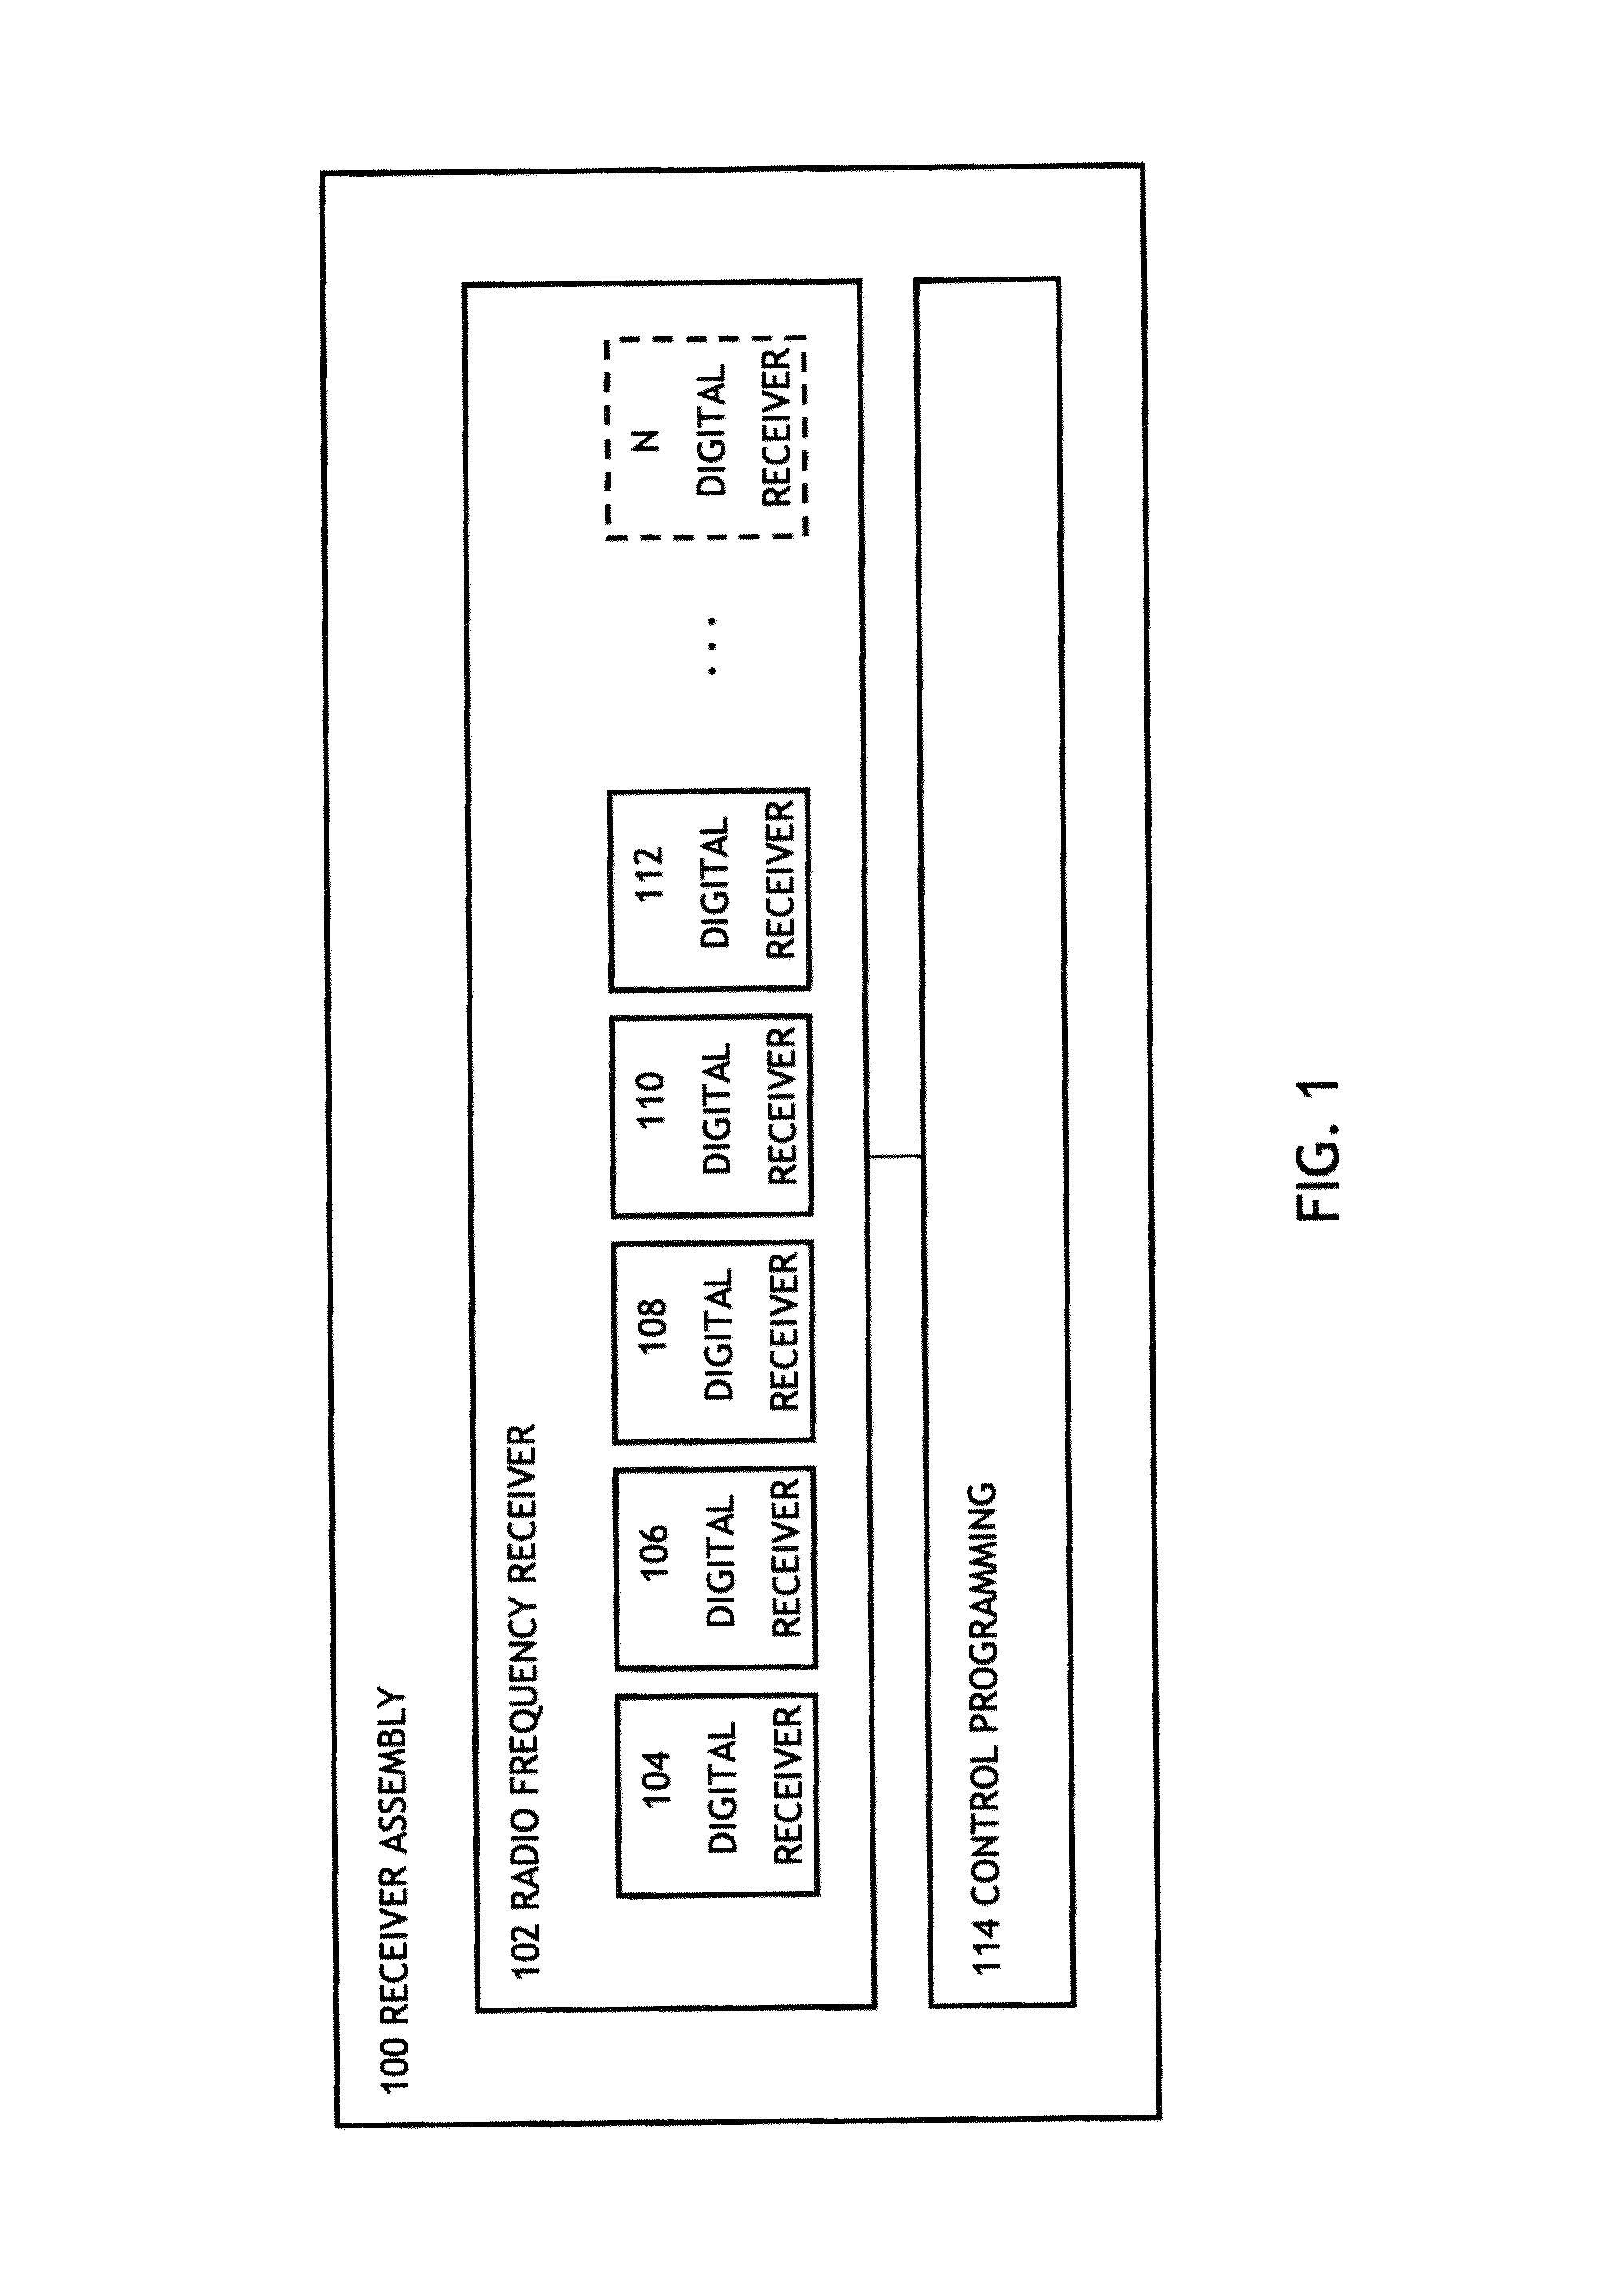 Syncronization frequency diversity reception utilizing a single RF receiver